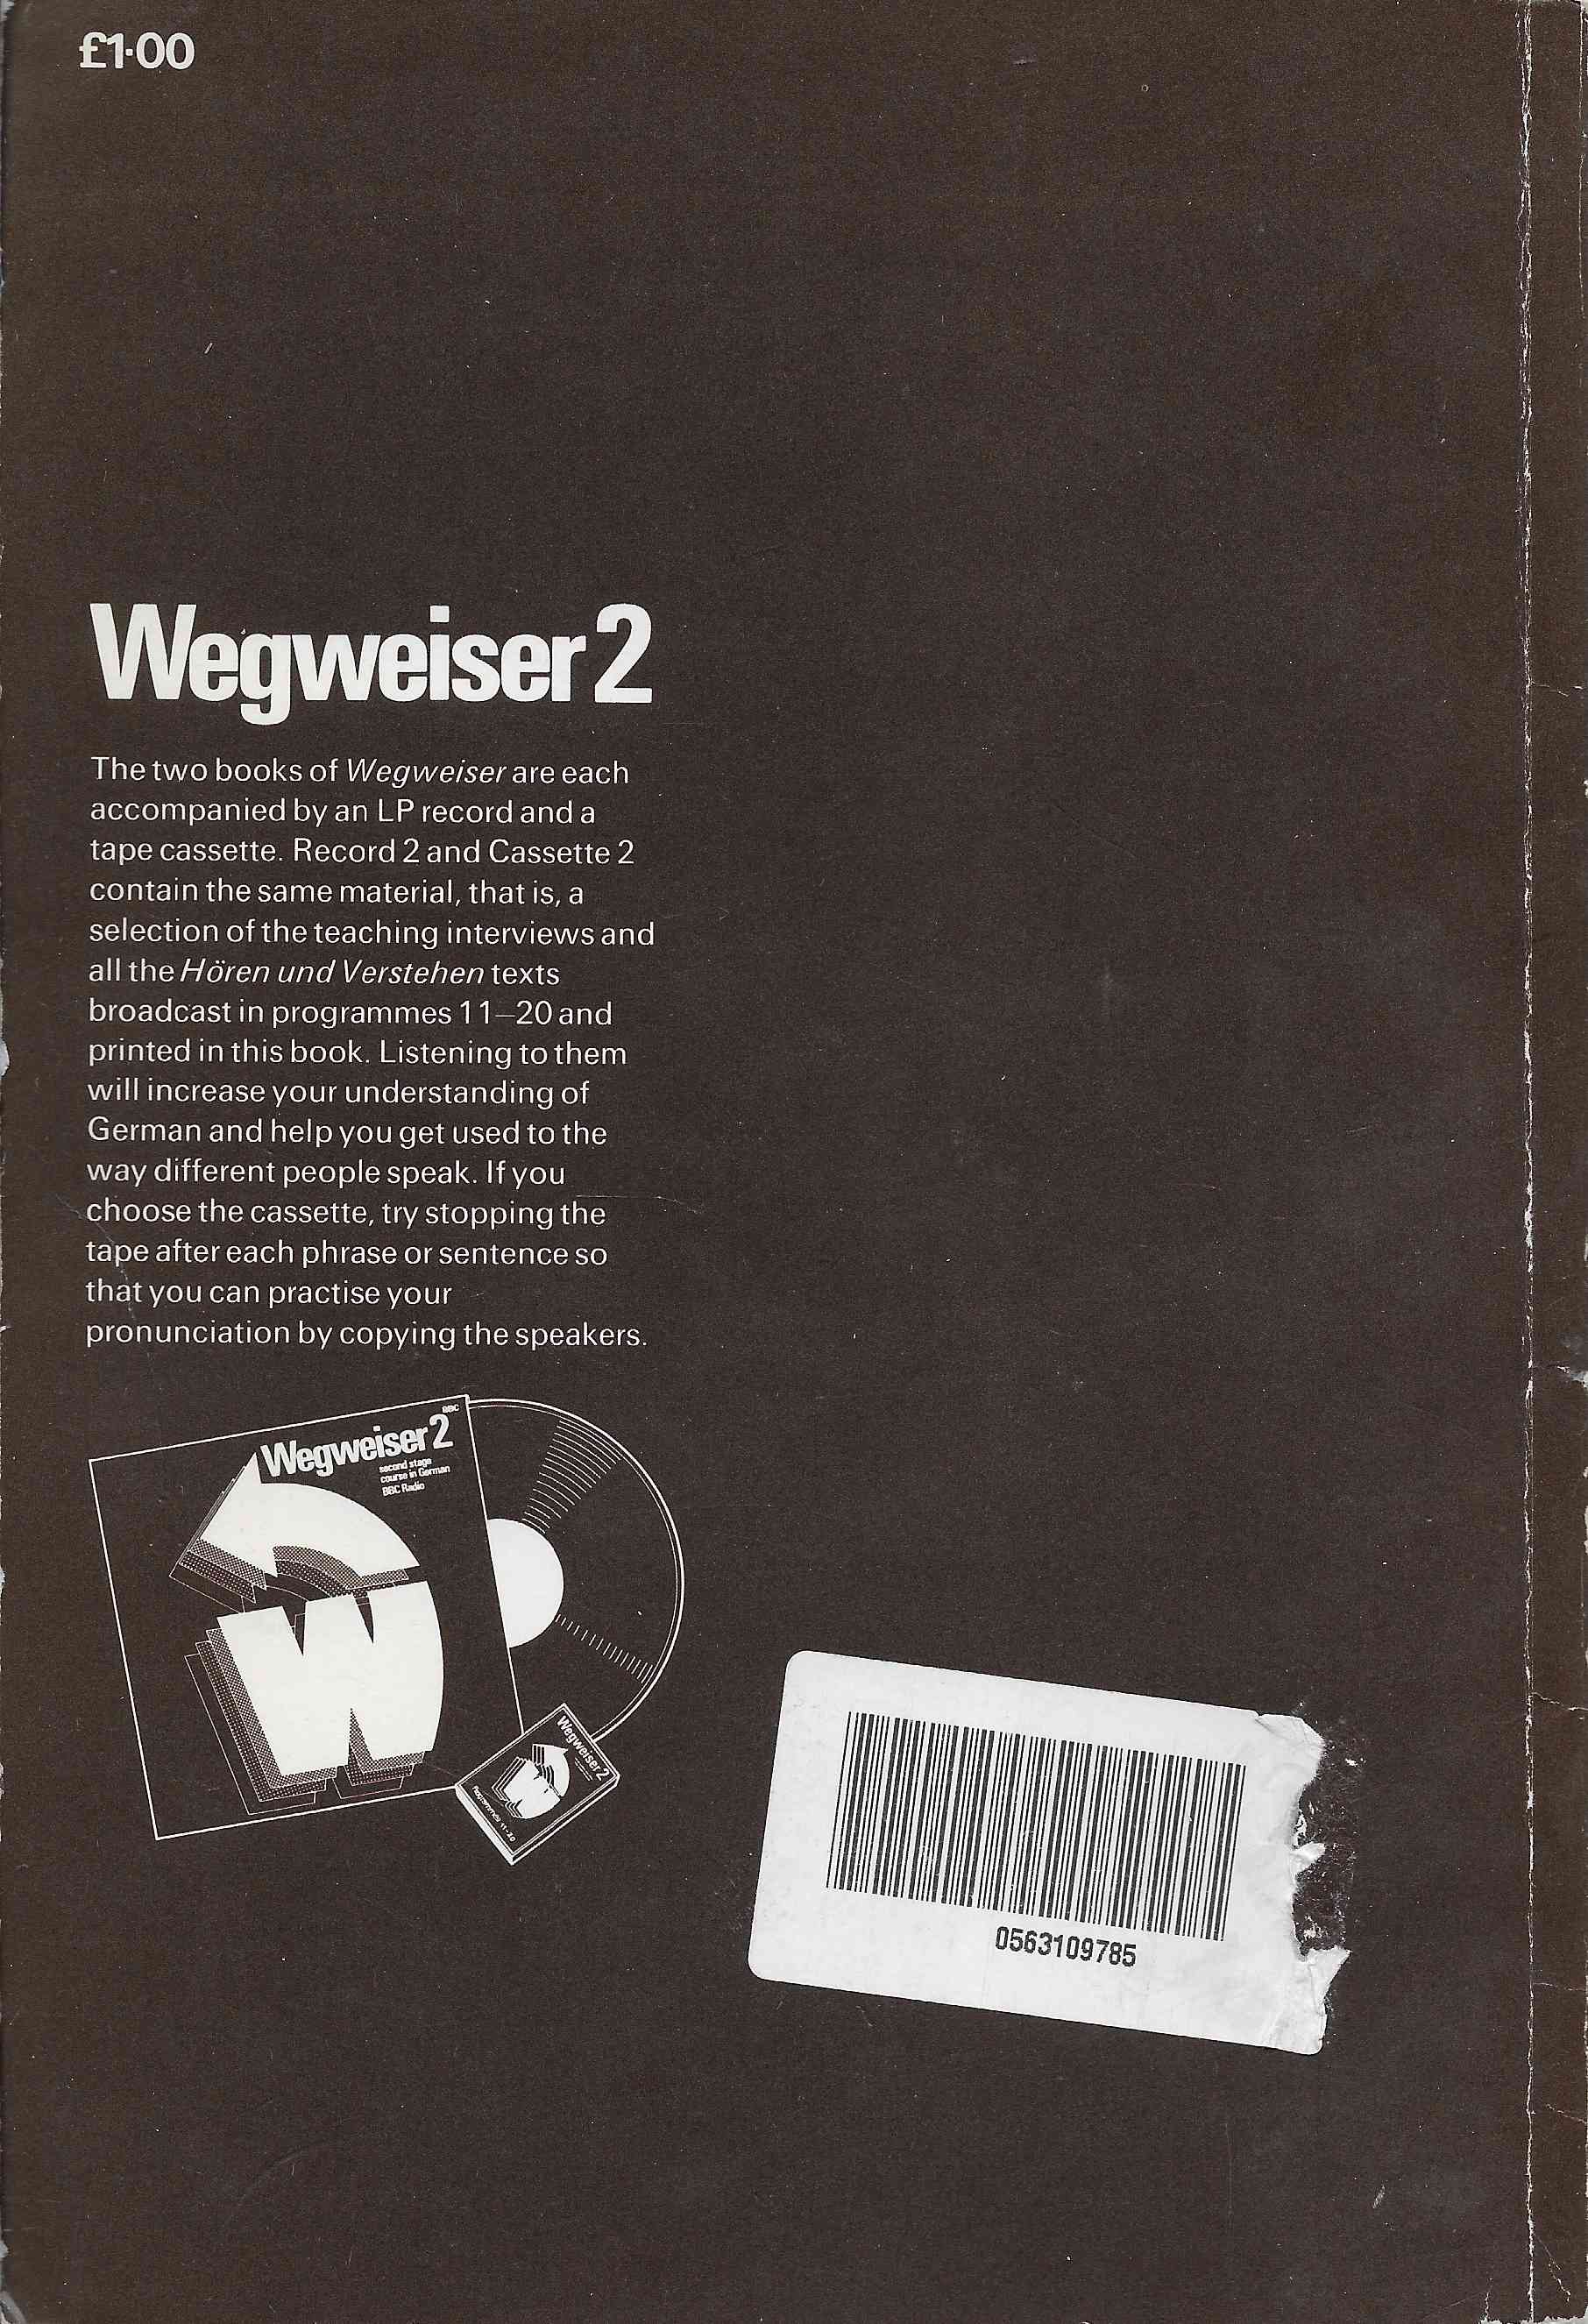 Picture of ISBN 0 563 10978 5 Wegweiser 2 by artist Antony Peck / Frank Kershaw / Helga Howard from the BBC records and Tapes library